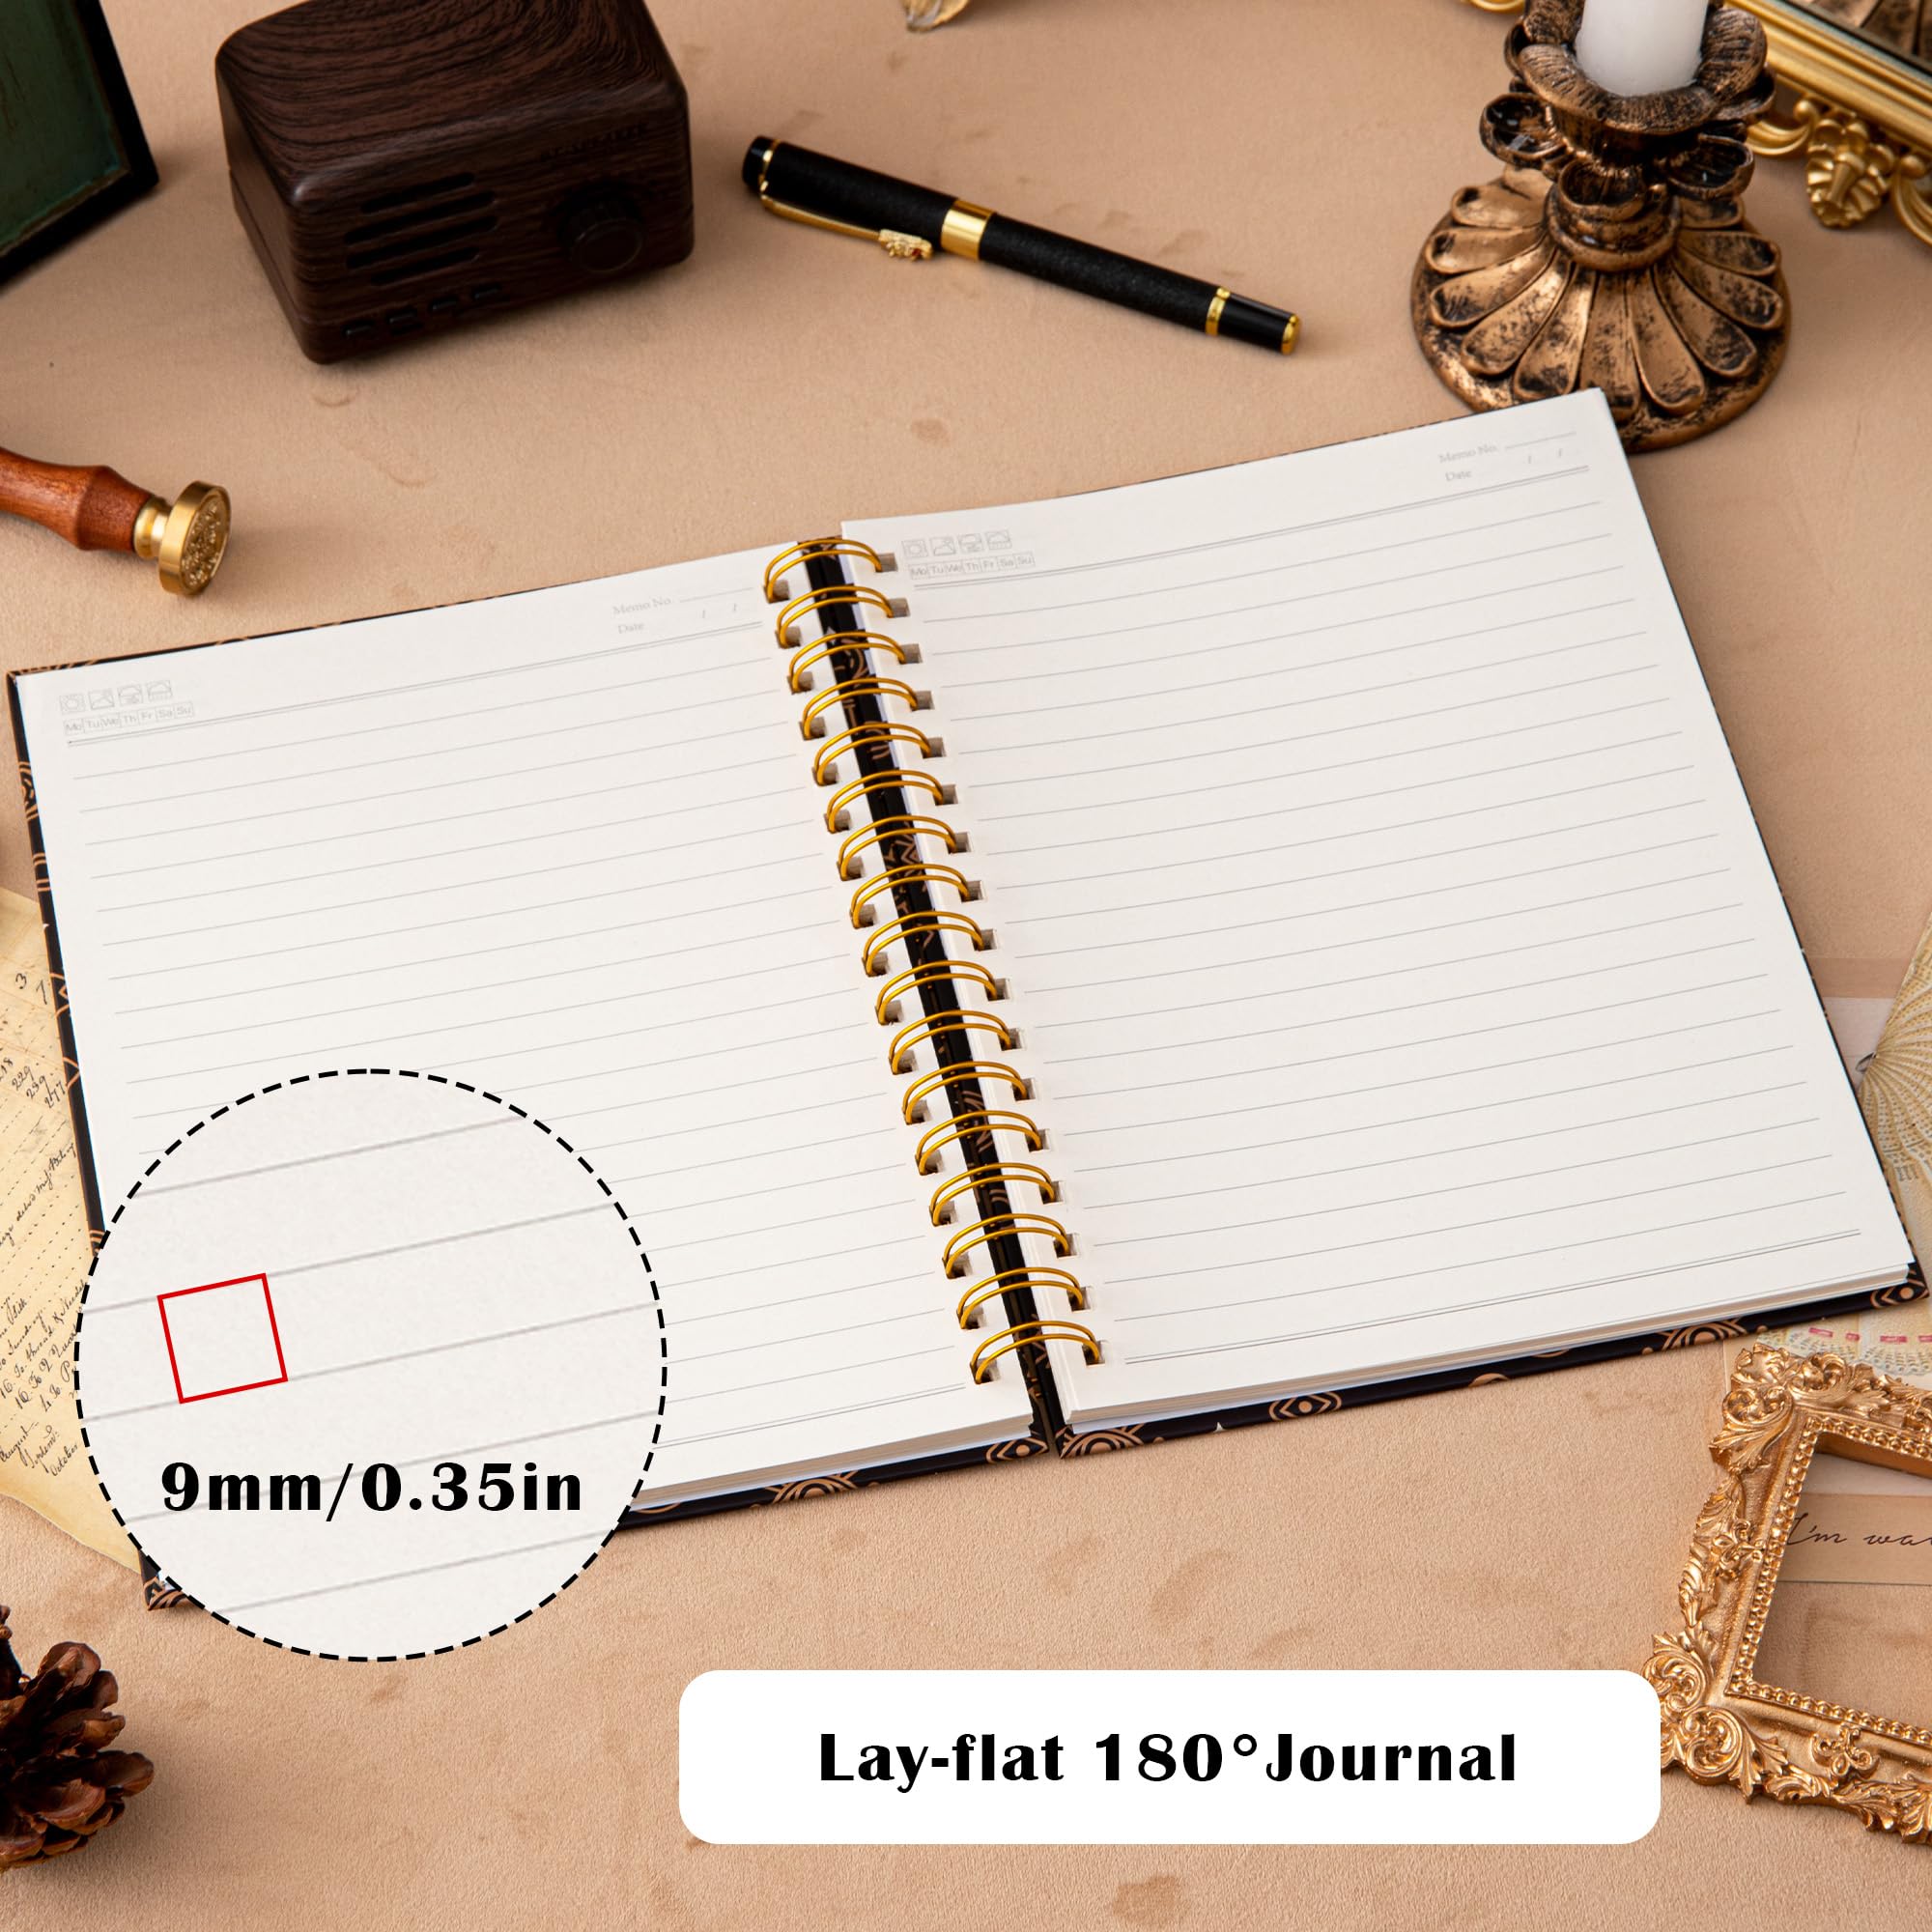 TIEFOSSI Spiral Notebook Journal - College Ruled/Line Spiral Notebook 237 x 178 mm - Spiral Notebook College Rule - Office Journal - B5 Letter Notebook for Work Study - 100gsm Thick Paper 200 Pages